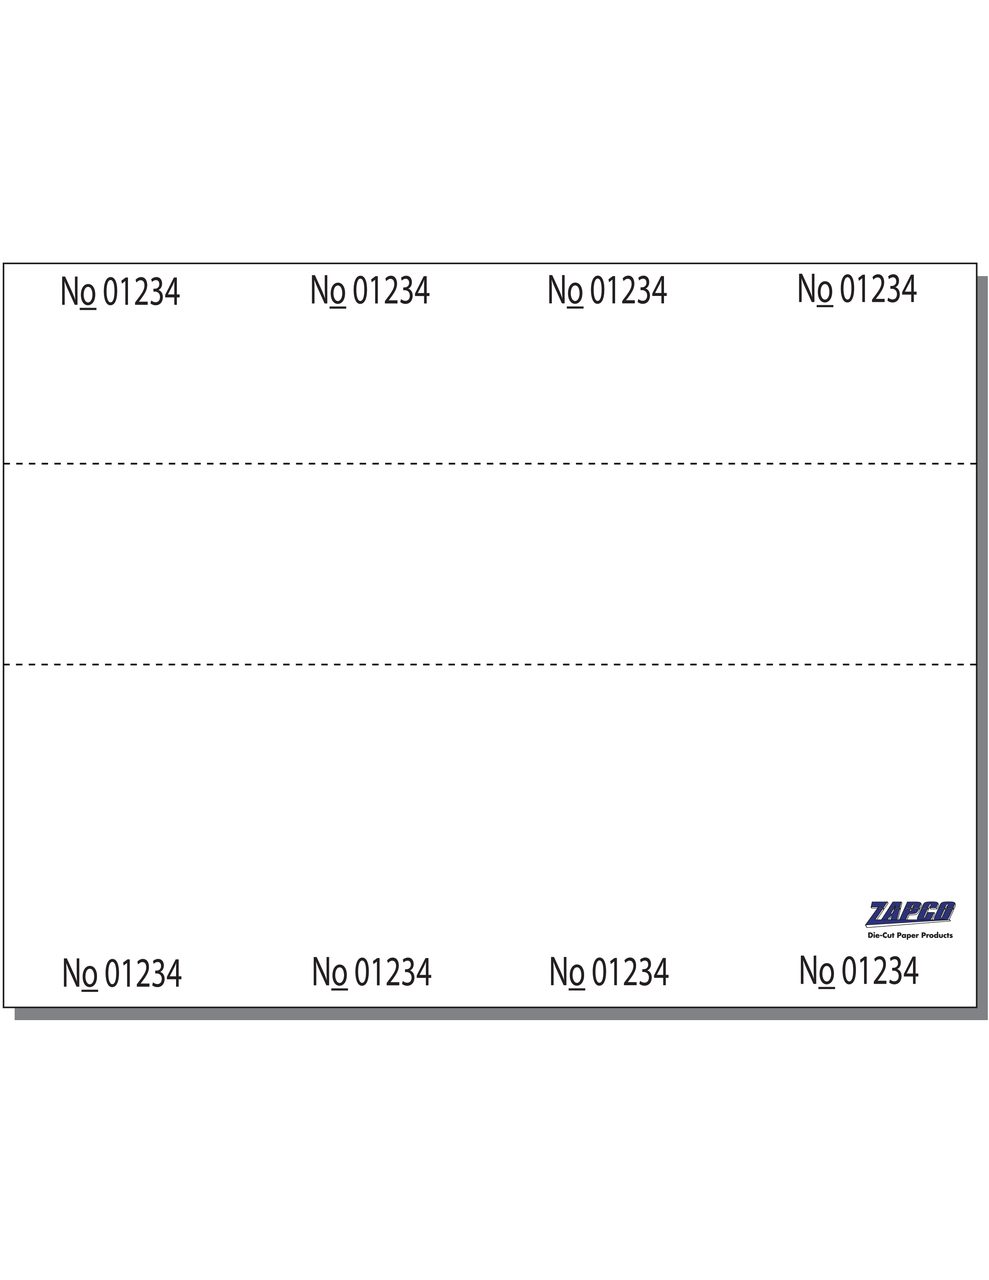 Item 510T: 4-up 2 1/8" x 6 1/2" Ticket with 1 3/4" Double Stub 6 1/2" x 8 1/2" Sheet(250 Sheets)